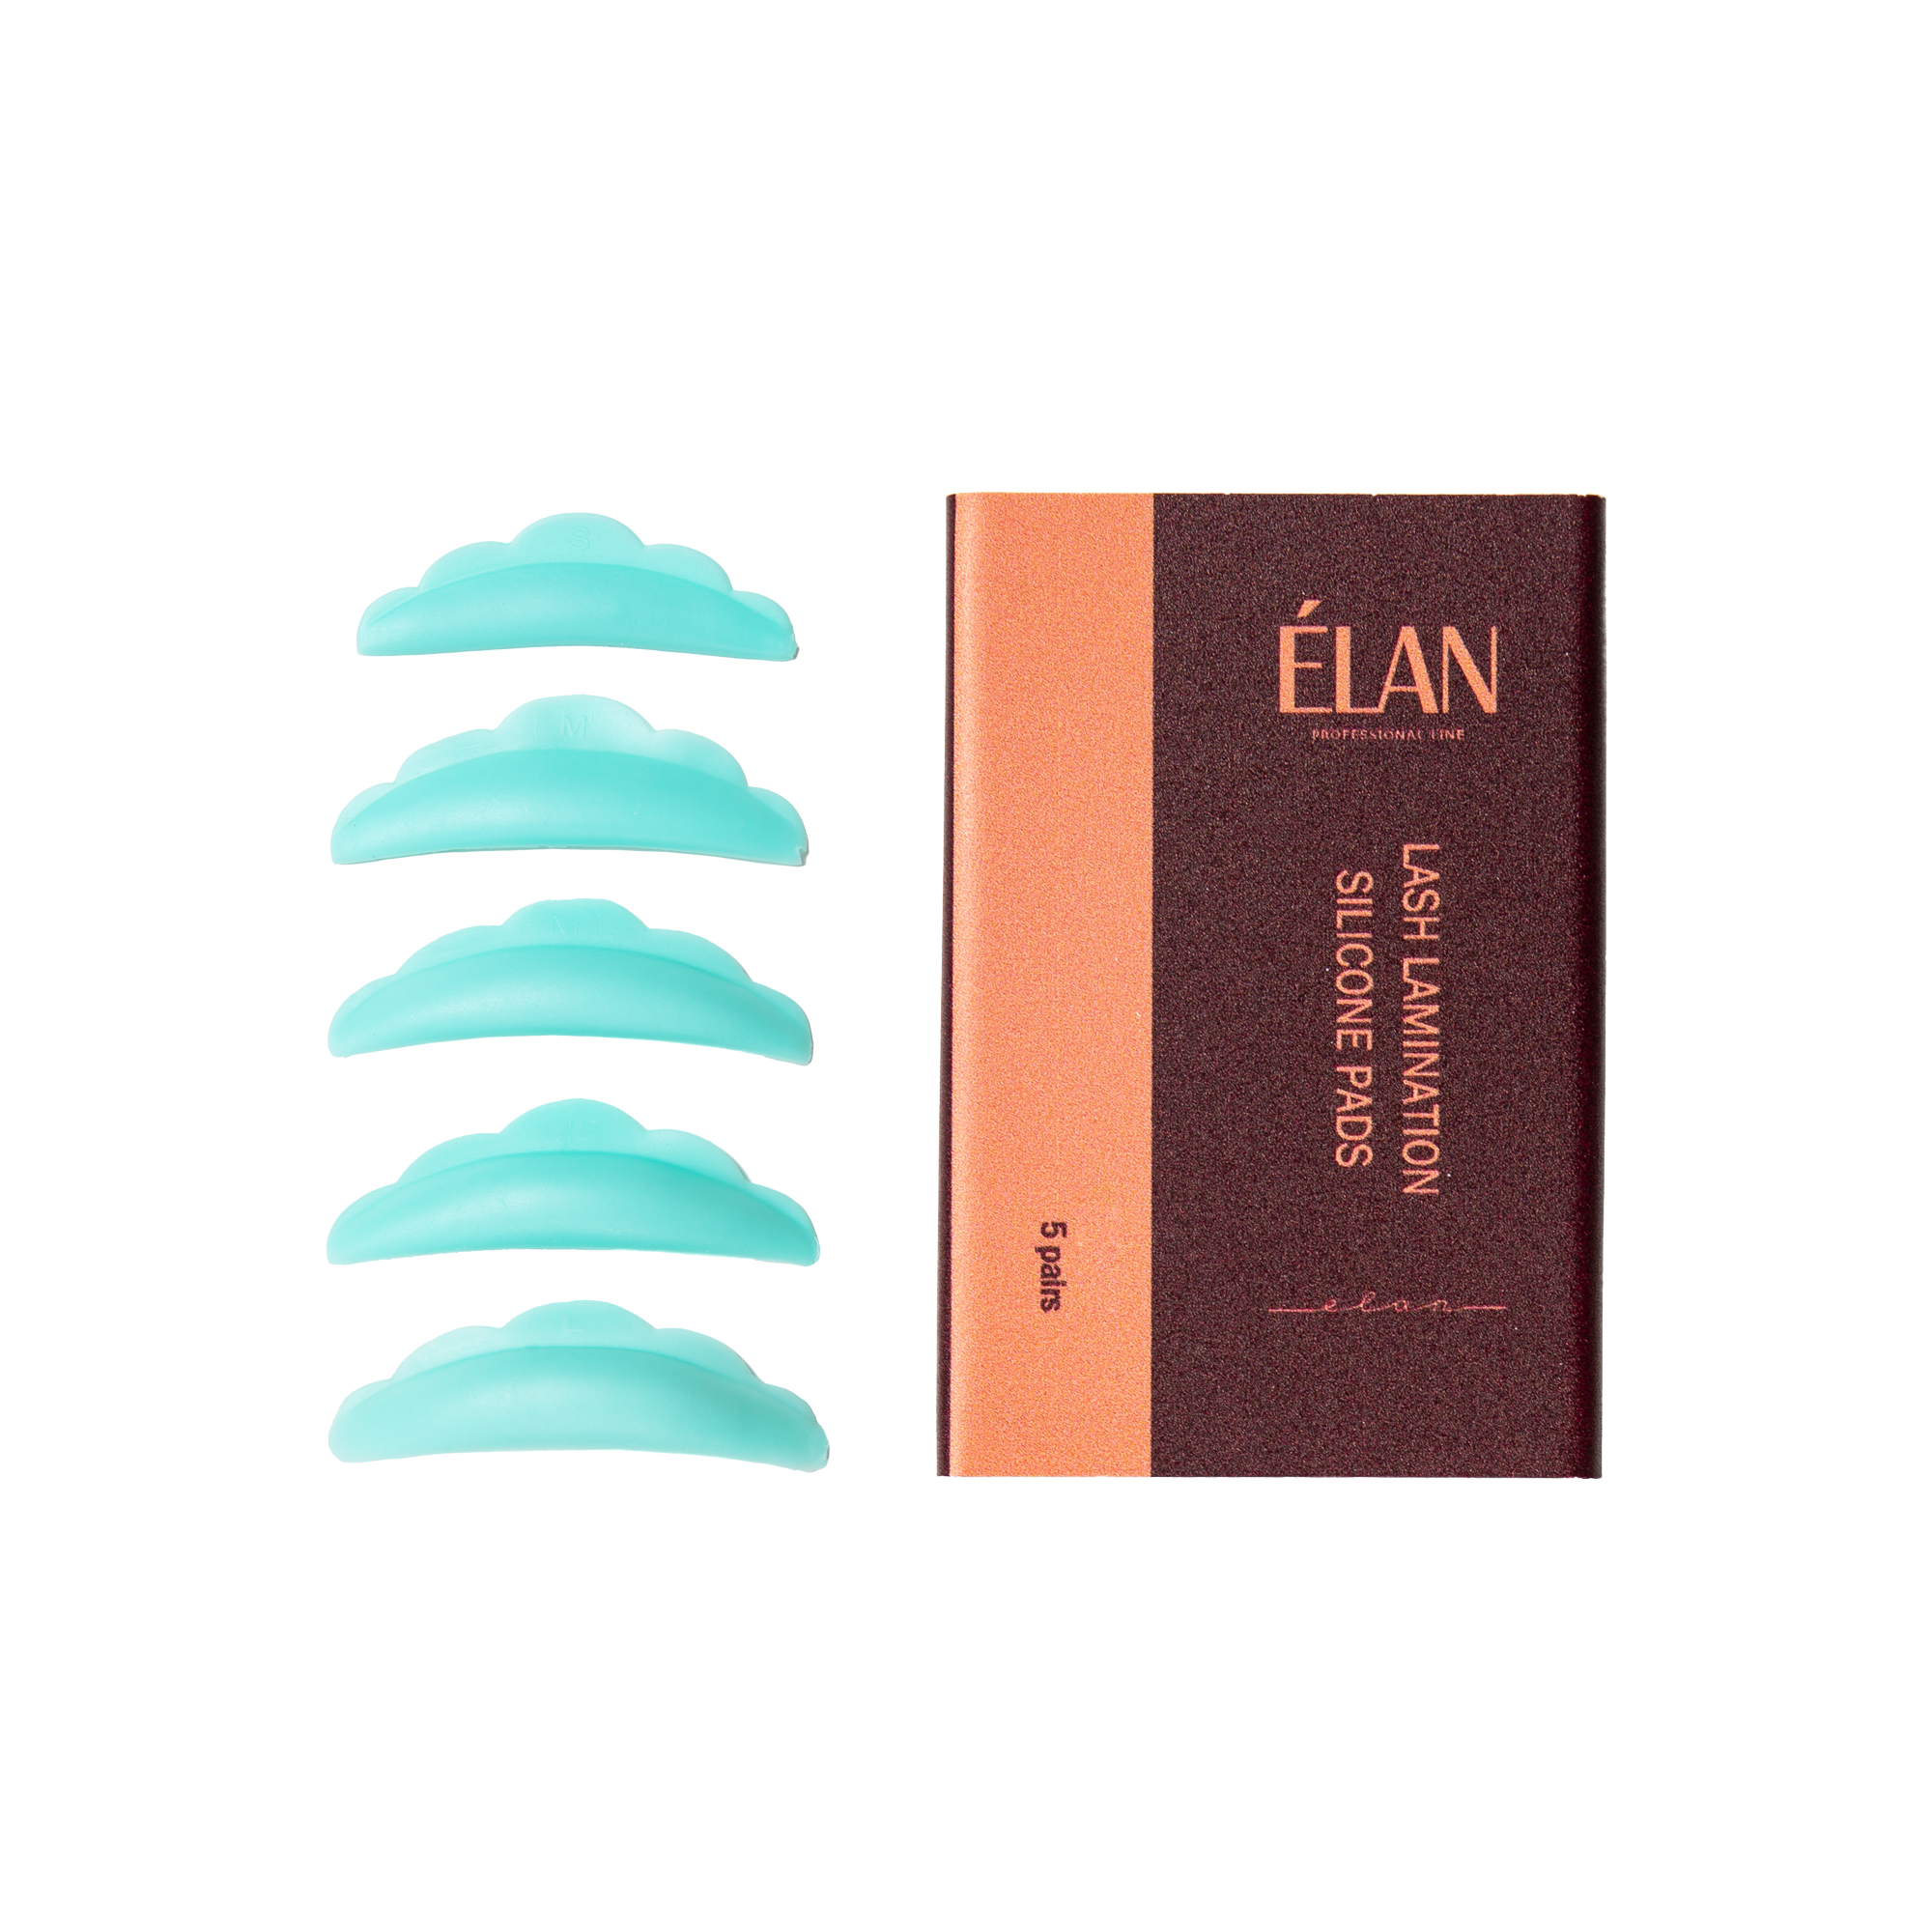 ÉLAN - Silicone Pads for lash lifts - (Size M2, 5 pairs)